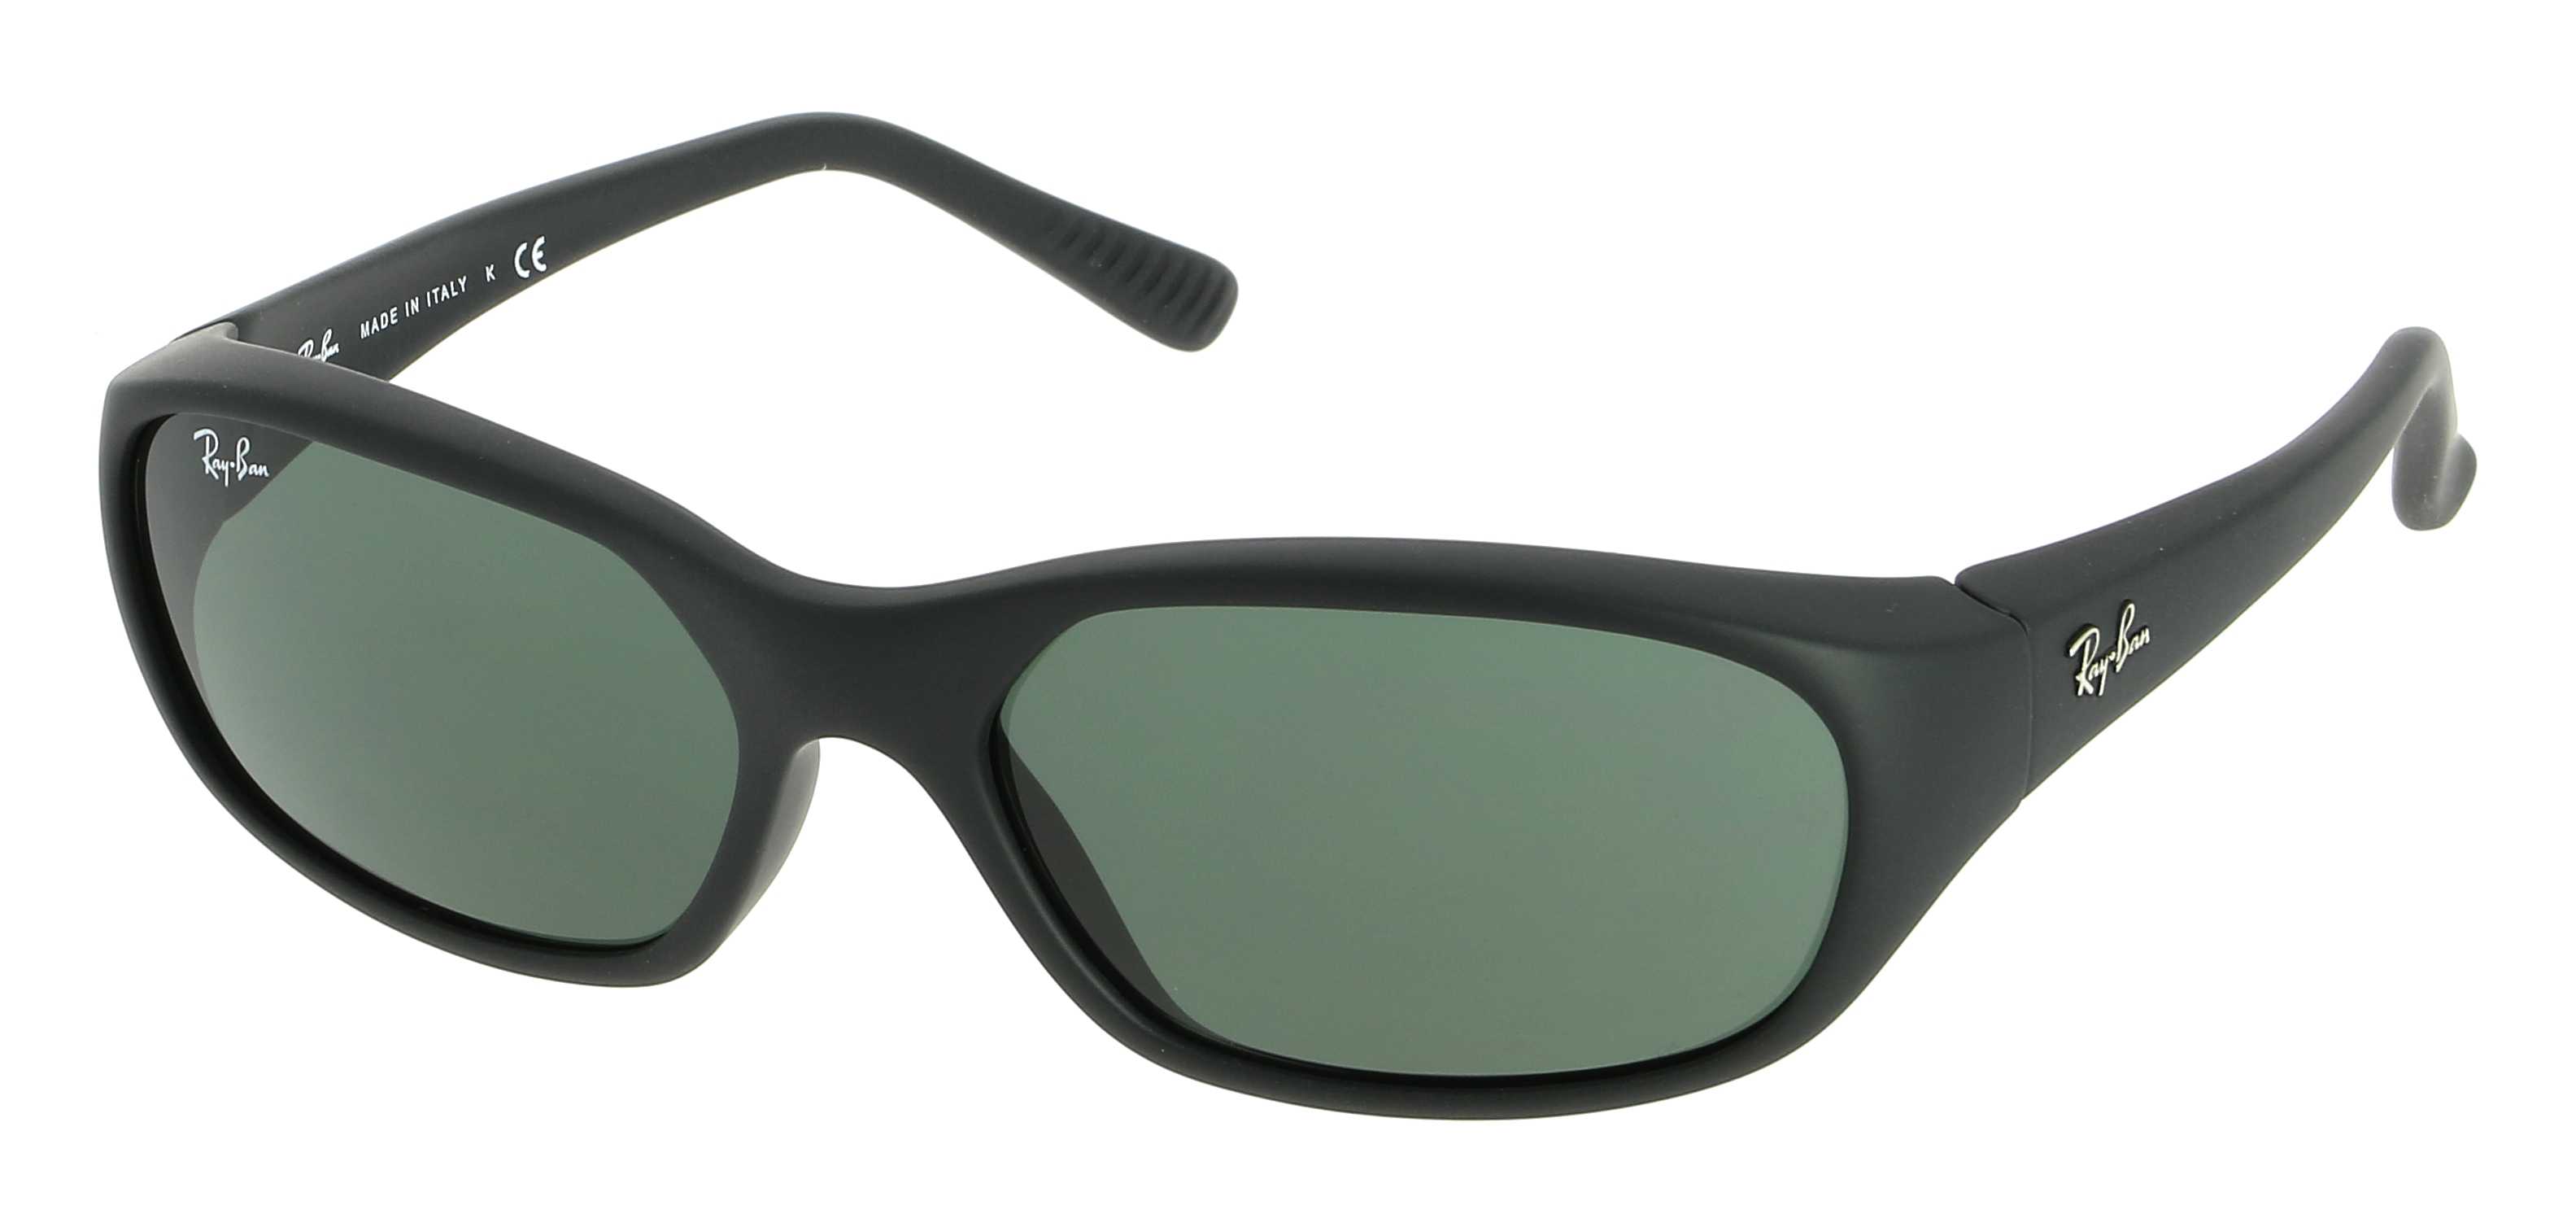 Sunglasses RAY-BAN RB 2016 W2578 Daddy-O 59/17 Man Noir gomme rectangle  frames Full Frame Glasses Classic 59mmx17mm 98$CA